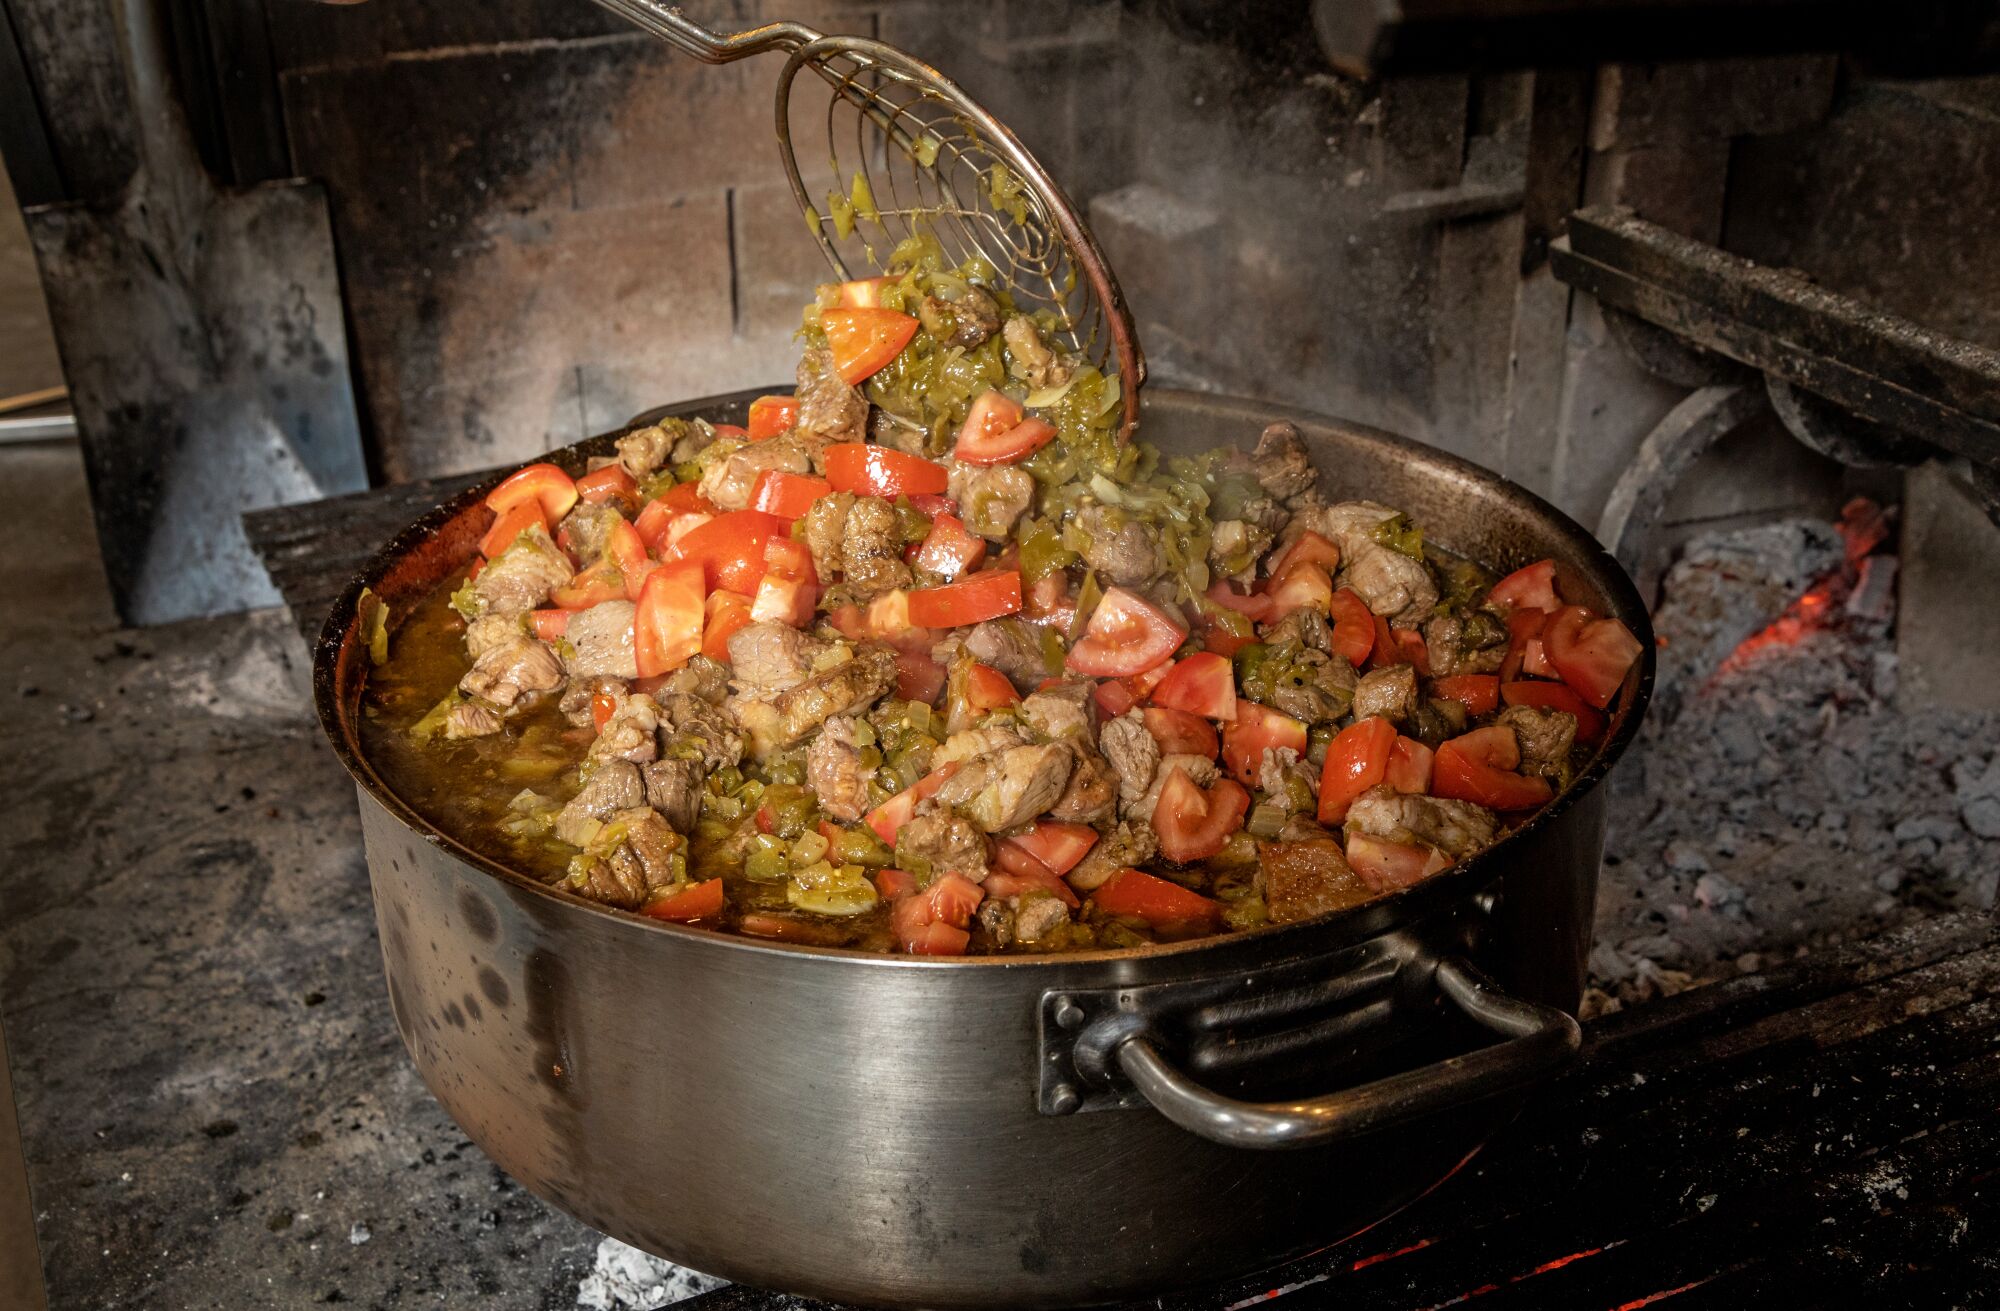 At Dunsmoor in Los Angeles, a large pot or stew filled with chunks of pork, chiles and tomatoes.